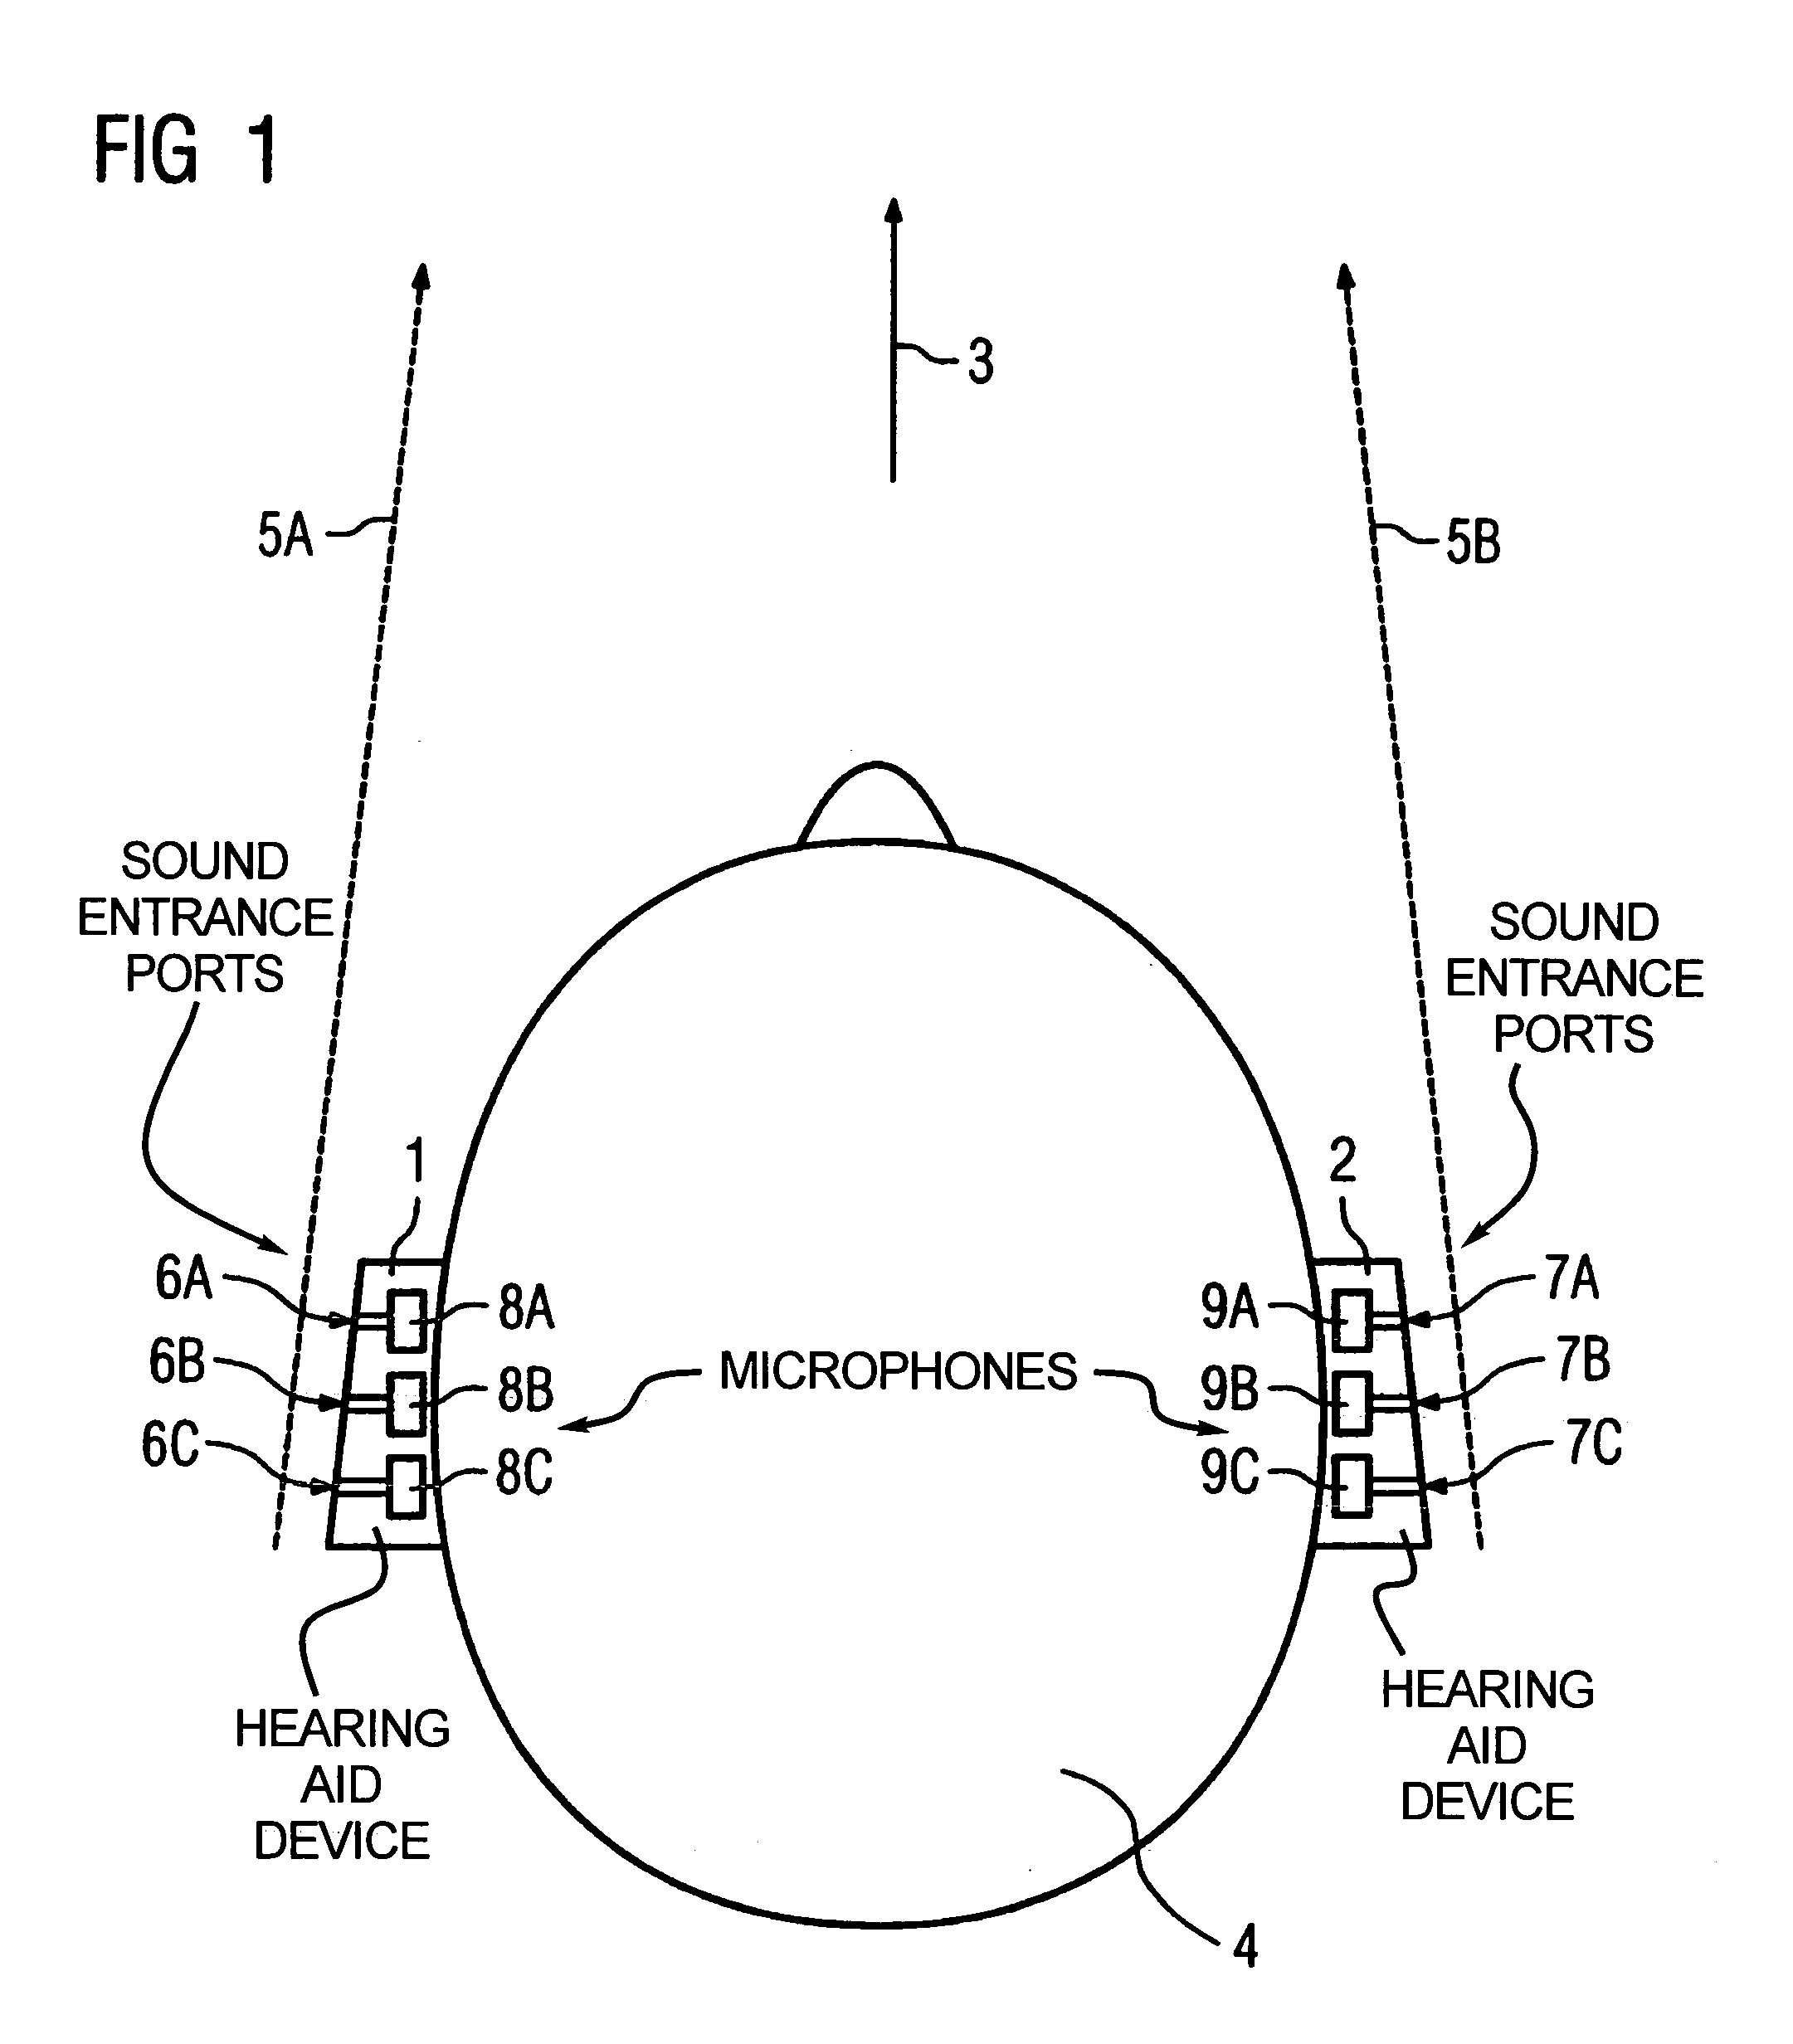 Hearing device system with behind-the-ear hearing aid devices fashioned side-specific